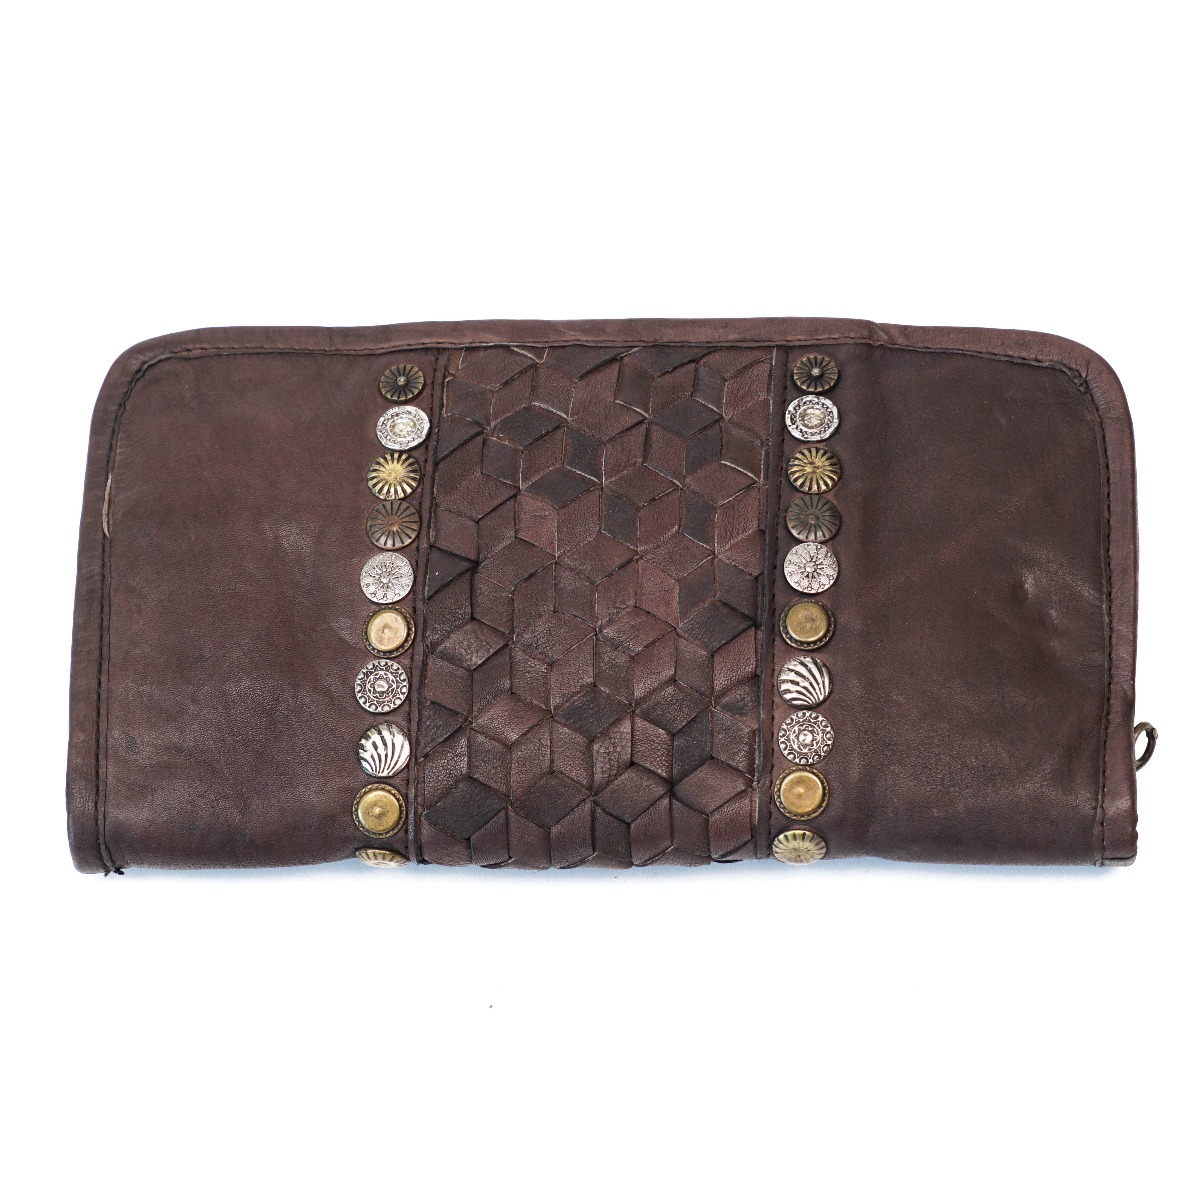 Handmade woven leather women's wallet with rivets